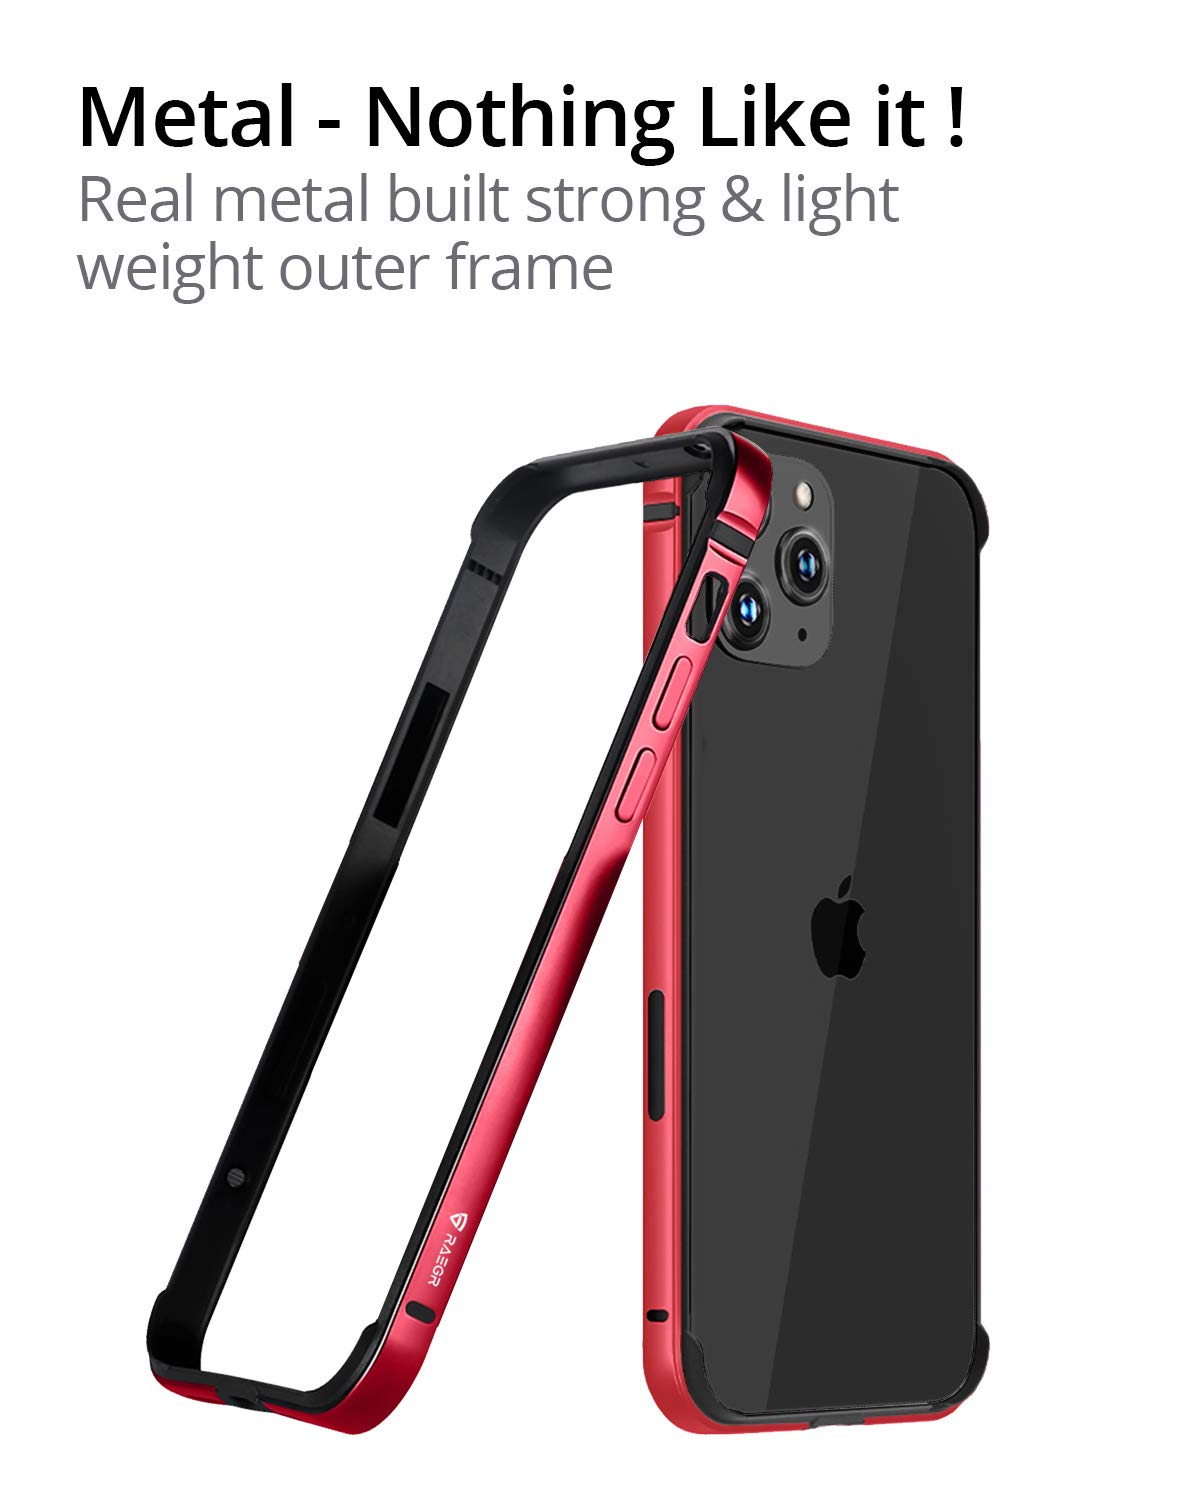 RAEGR iPhone 12 / iPhone 12 Pro 5G Anodized Aluminum Bumper Case, Supports Mag-Safe Wireless Charging 6.1